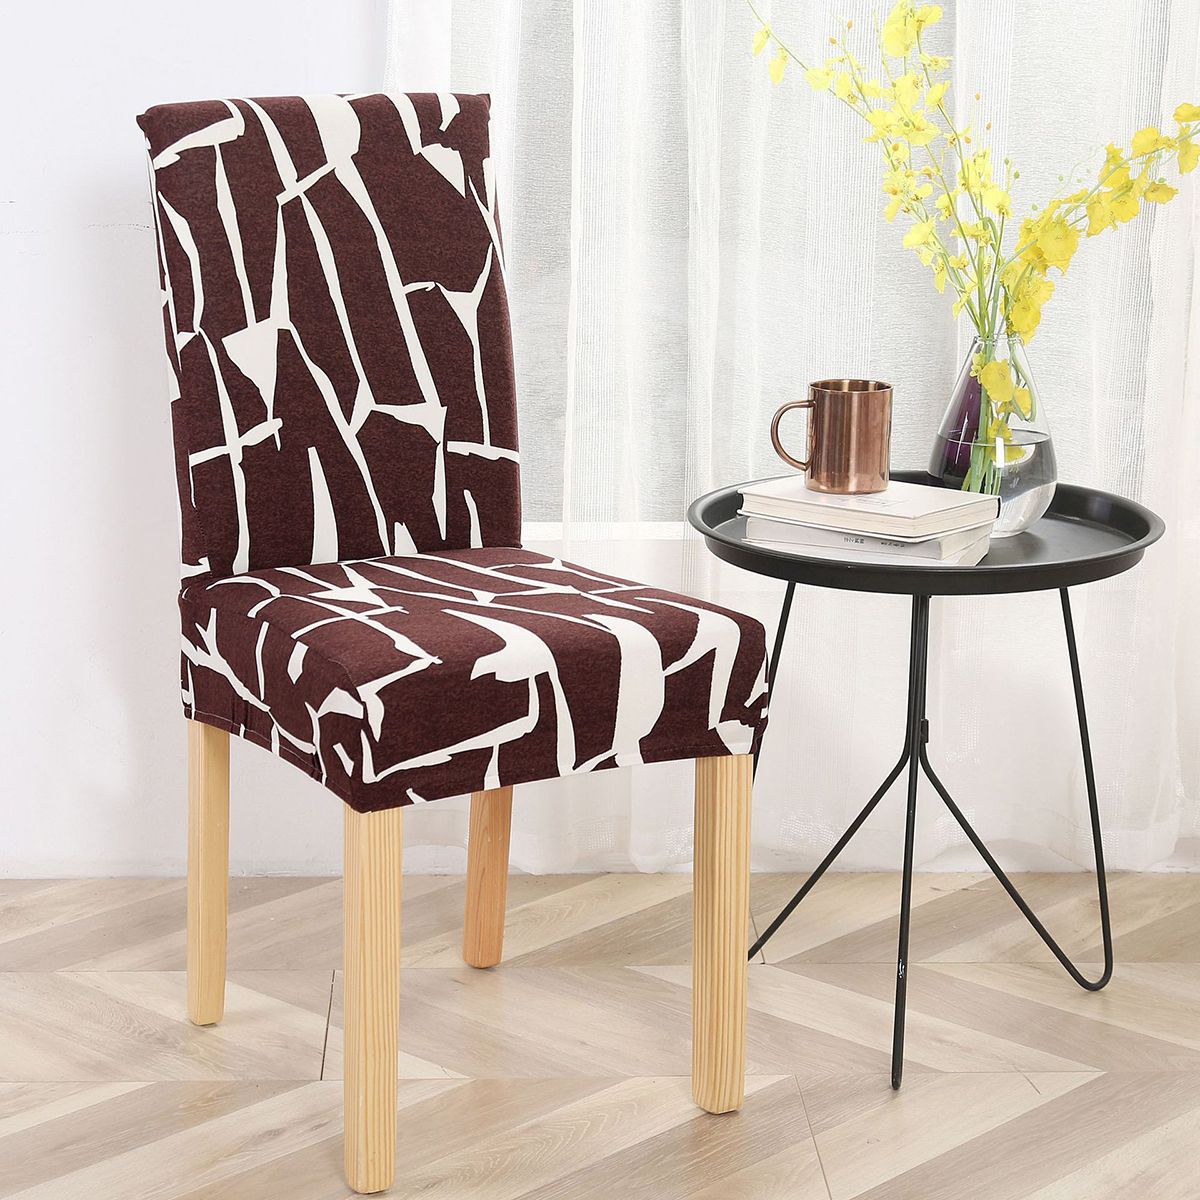 Universal-Chair-Covers-Printing-Floral-Stretch-Spandex-Chair-Protector-Slip-1645200